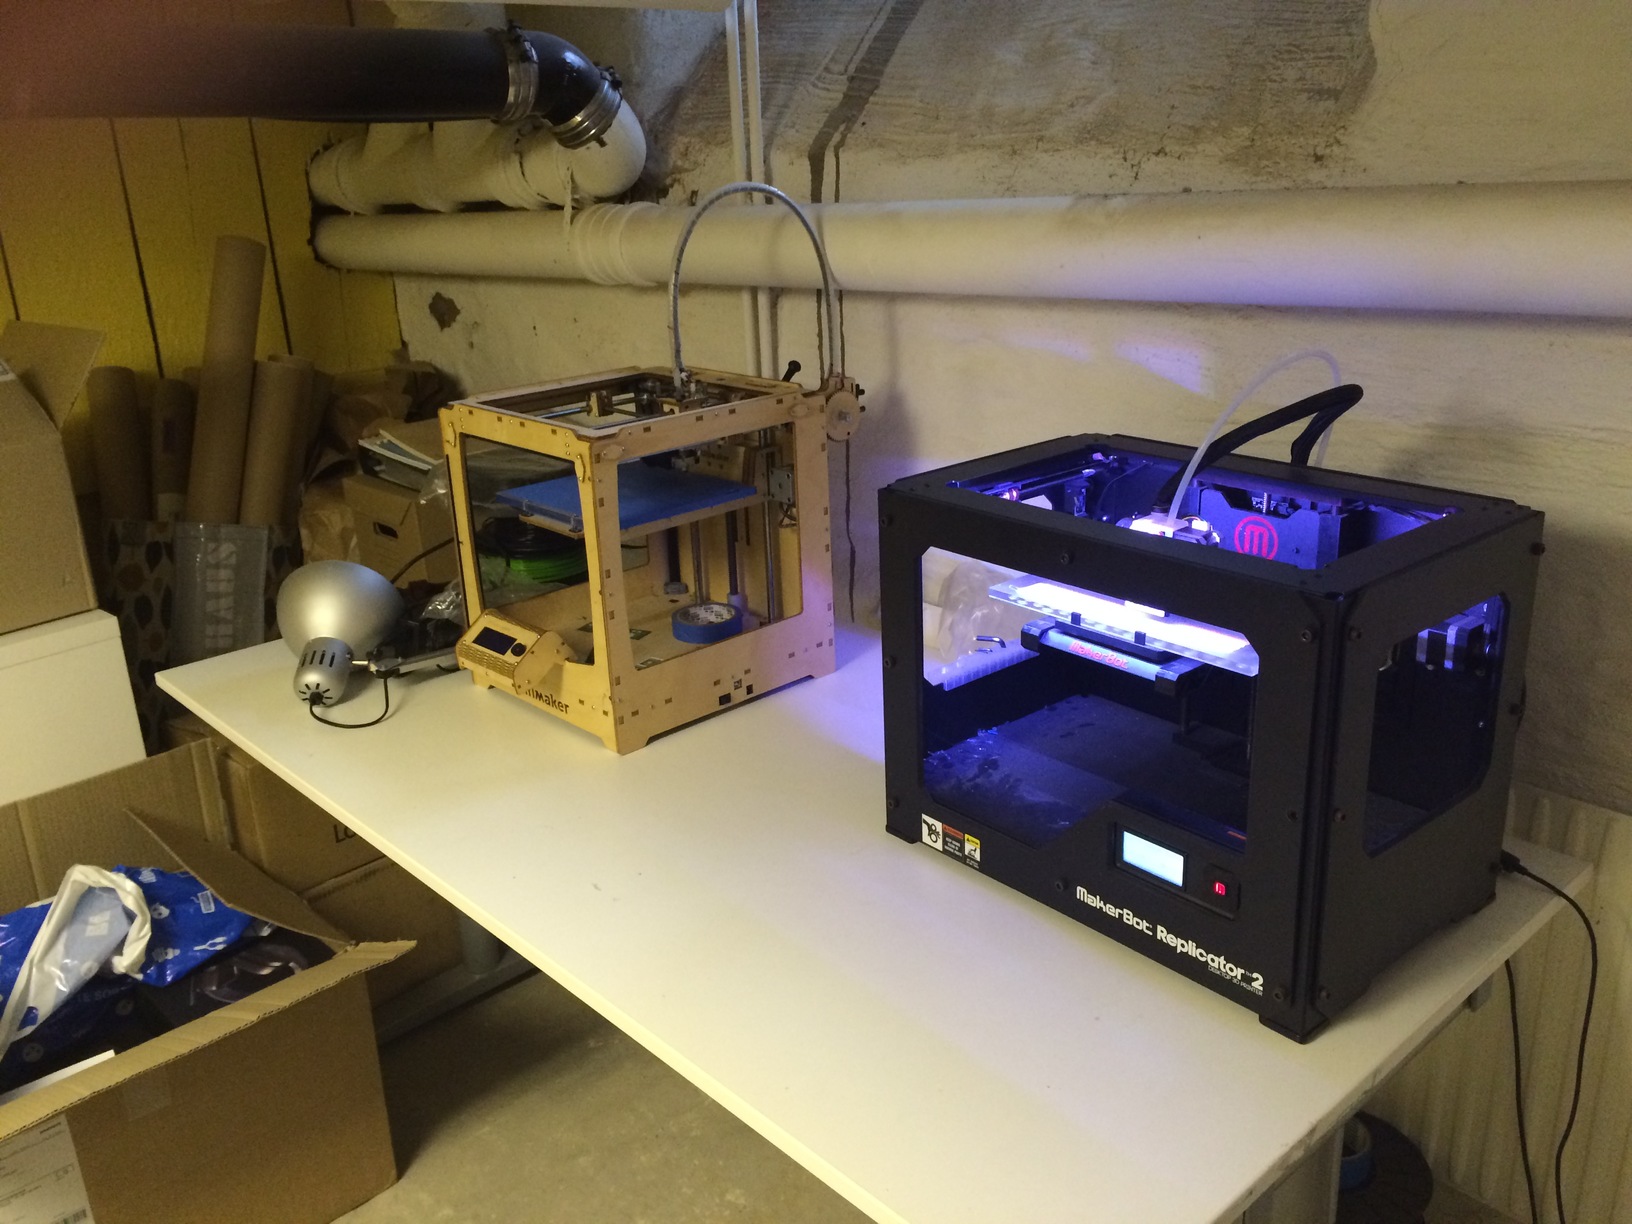 Our Ultimaker has a new friend